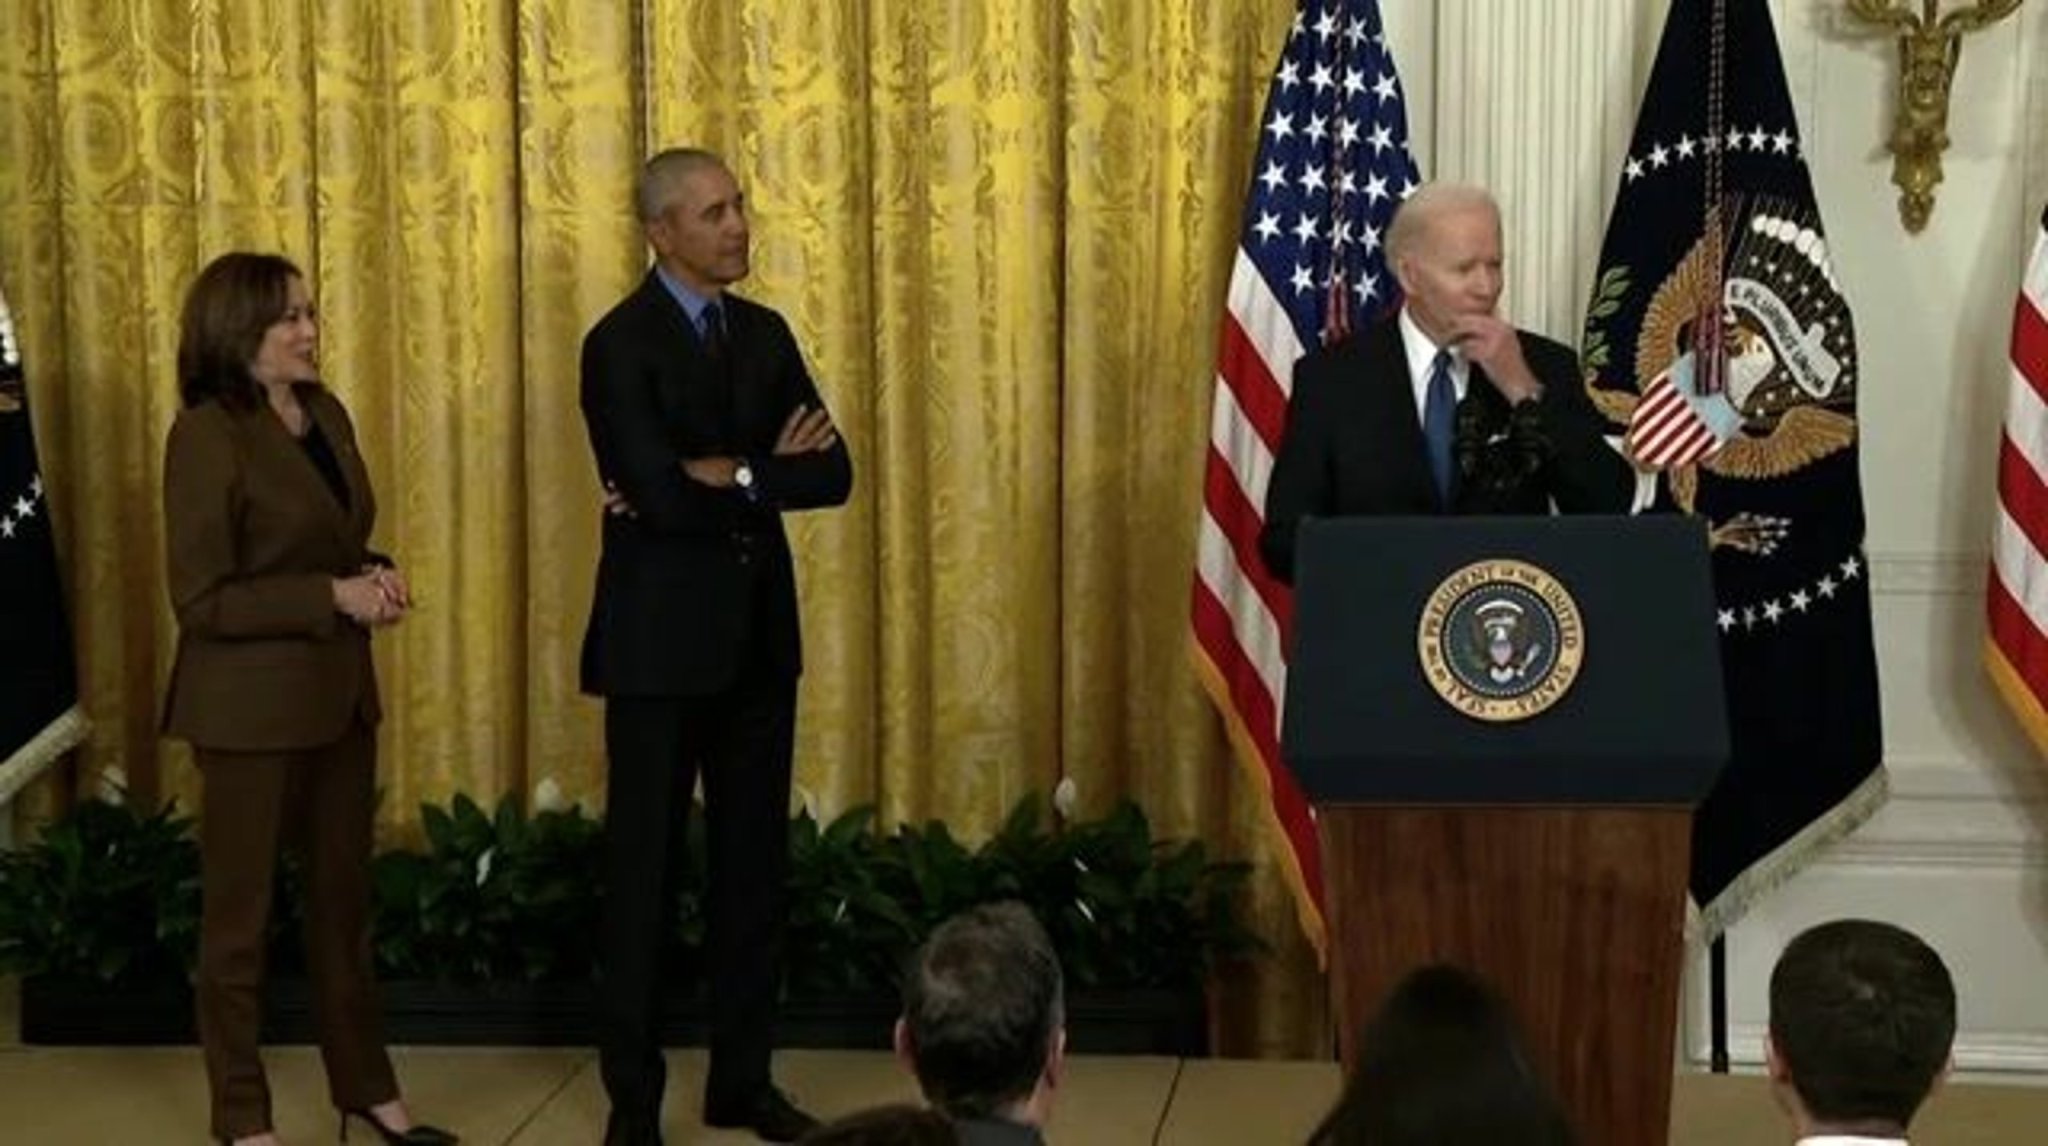 Biden welcomes Obama to the WH: "We just had lunch together, and we weren't sure who was supposed to sit where."